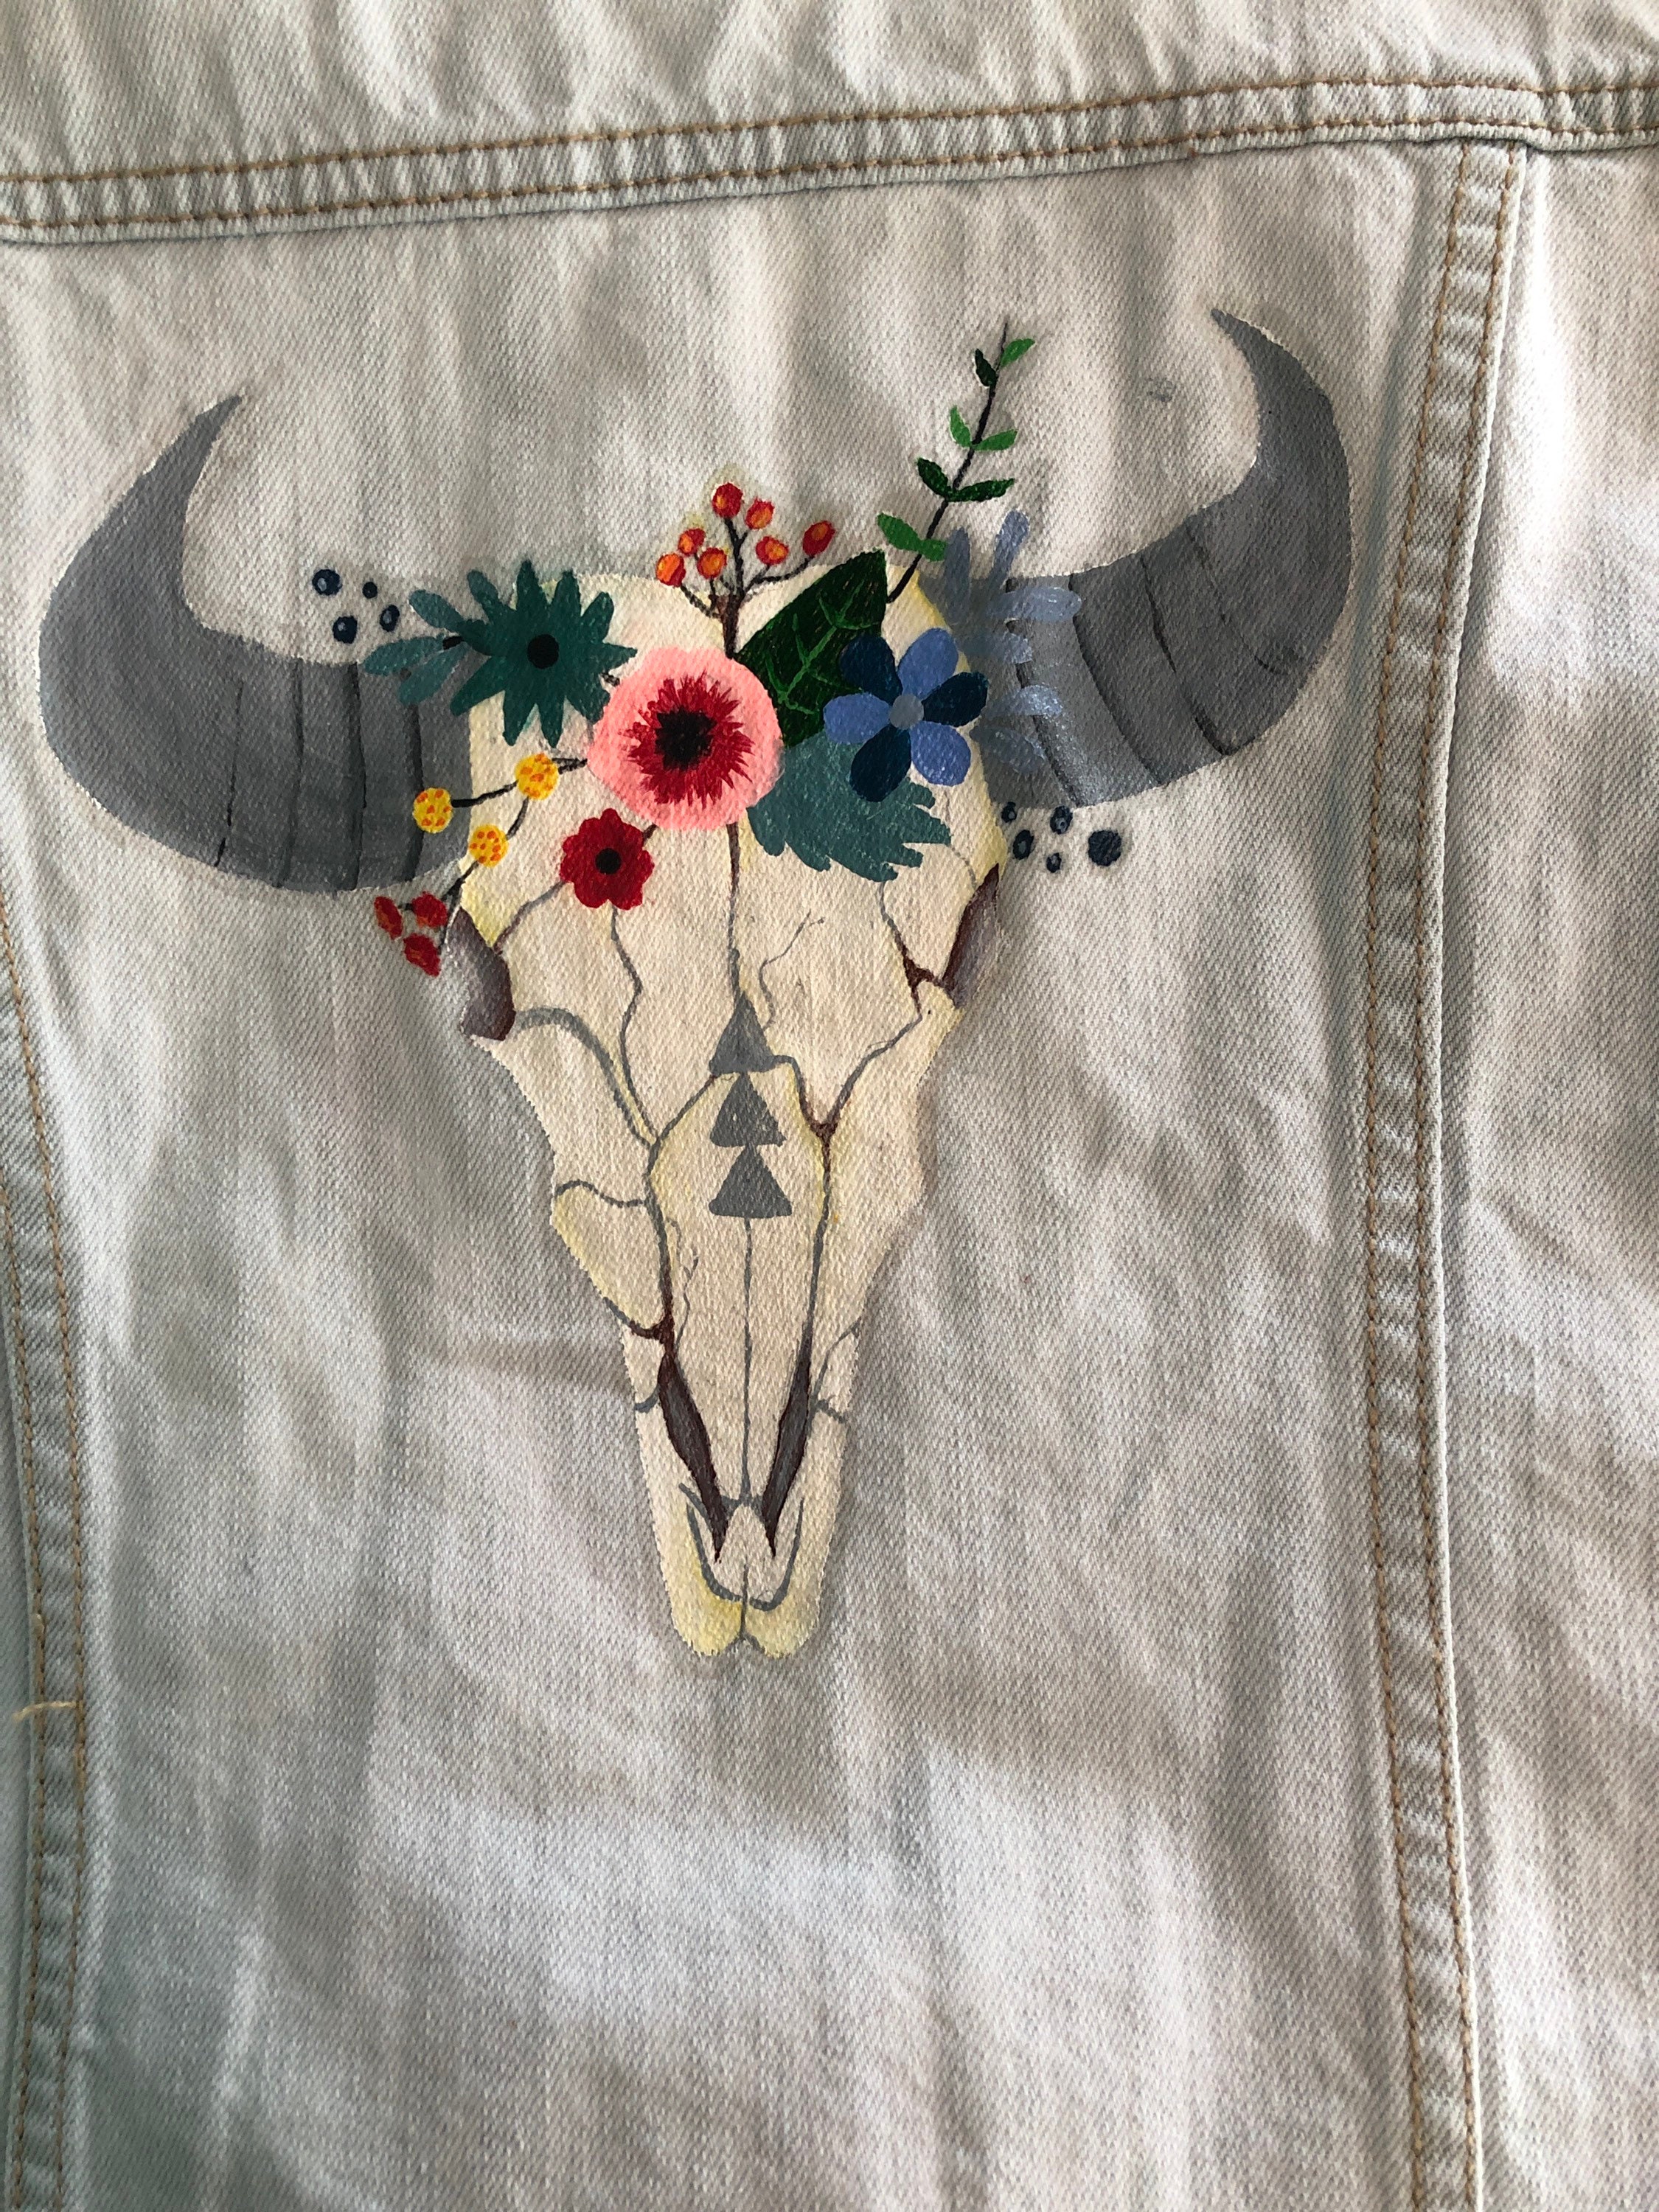 Found this amazing hand painted denim jacket on sale for 80$ : r